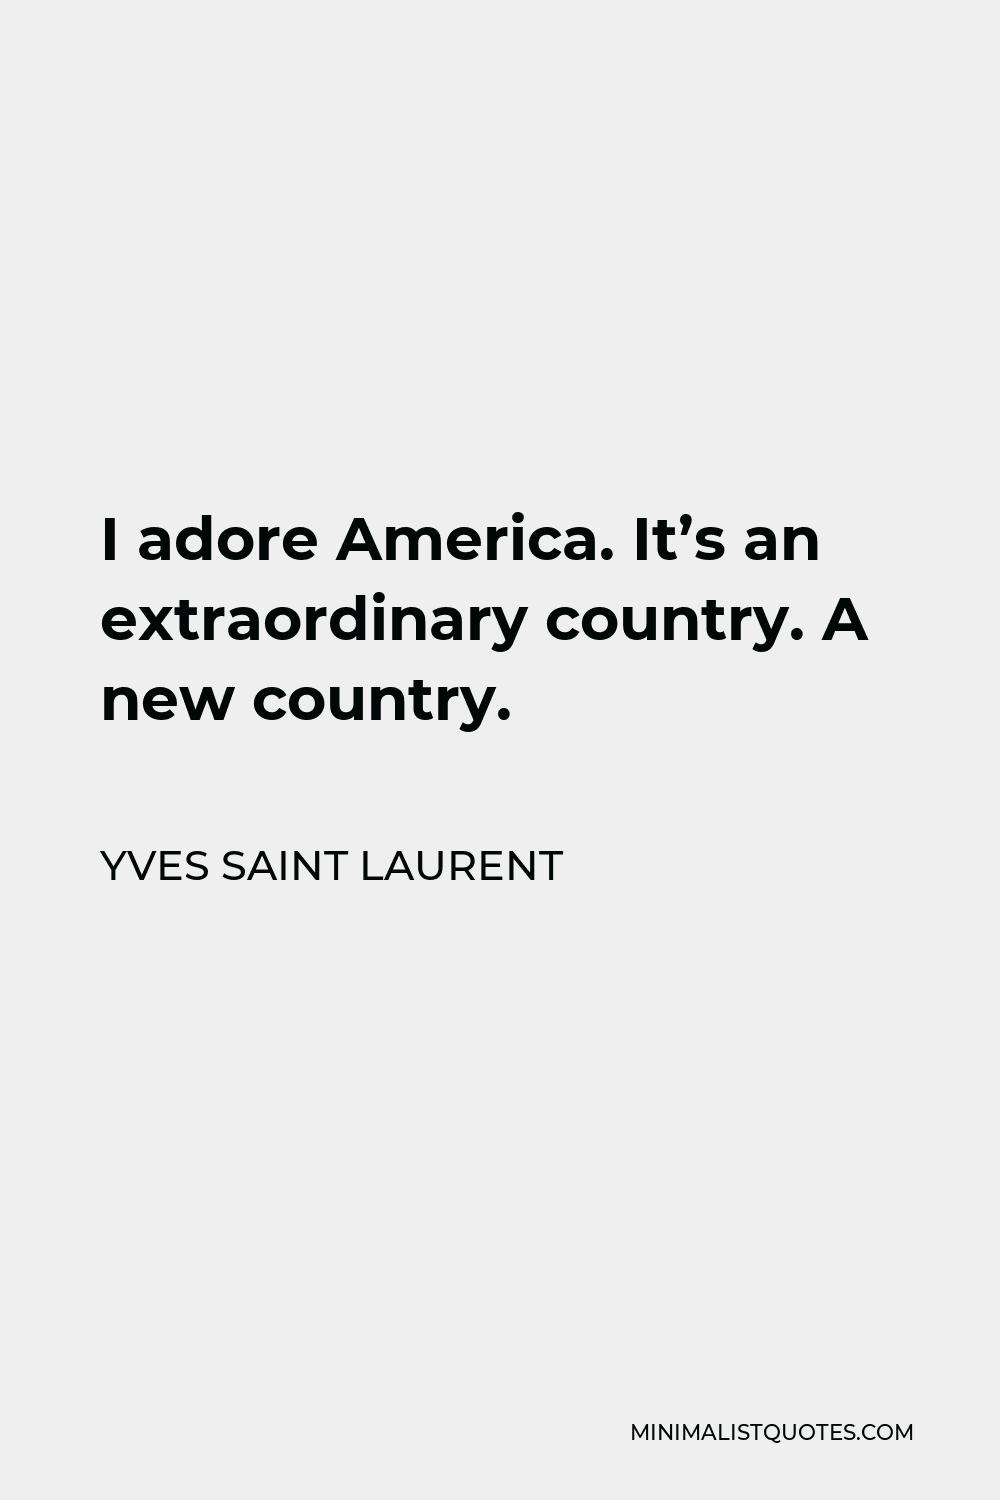 Yves Saint Laurent Quote - I adore America. It’s an extraordinary country. A new country.